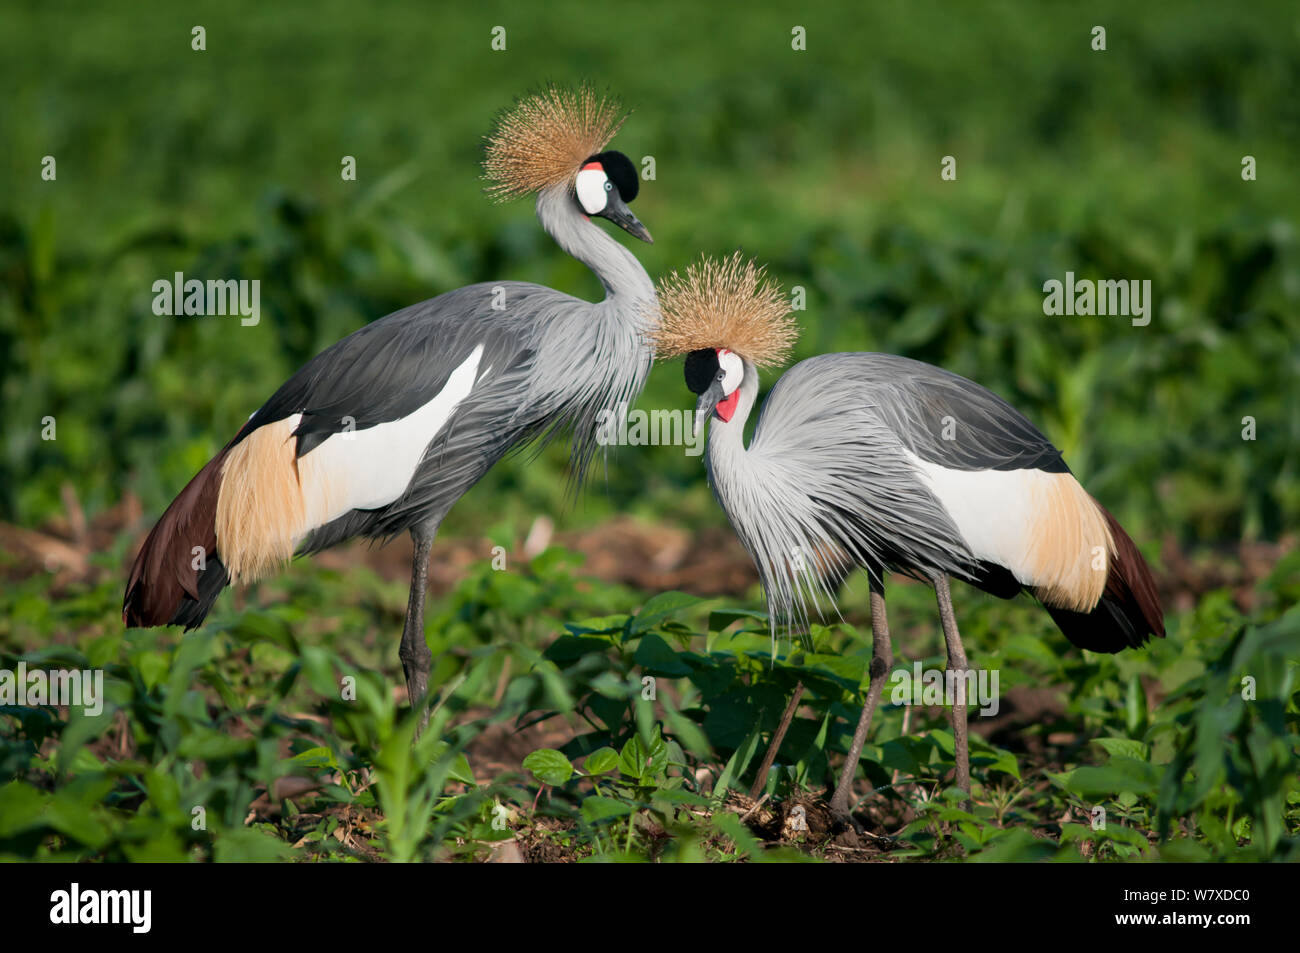 Two Grey crowned cranes (Balearica regulorum gibbericeps) foraging on a commercial green bean farm, Tanzania, East Africa. Stock Photo